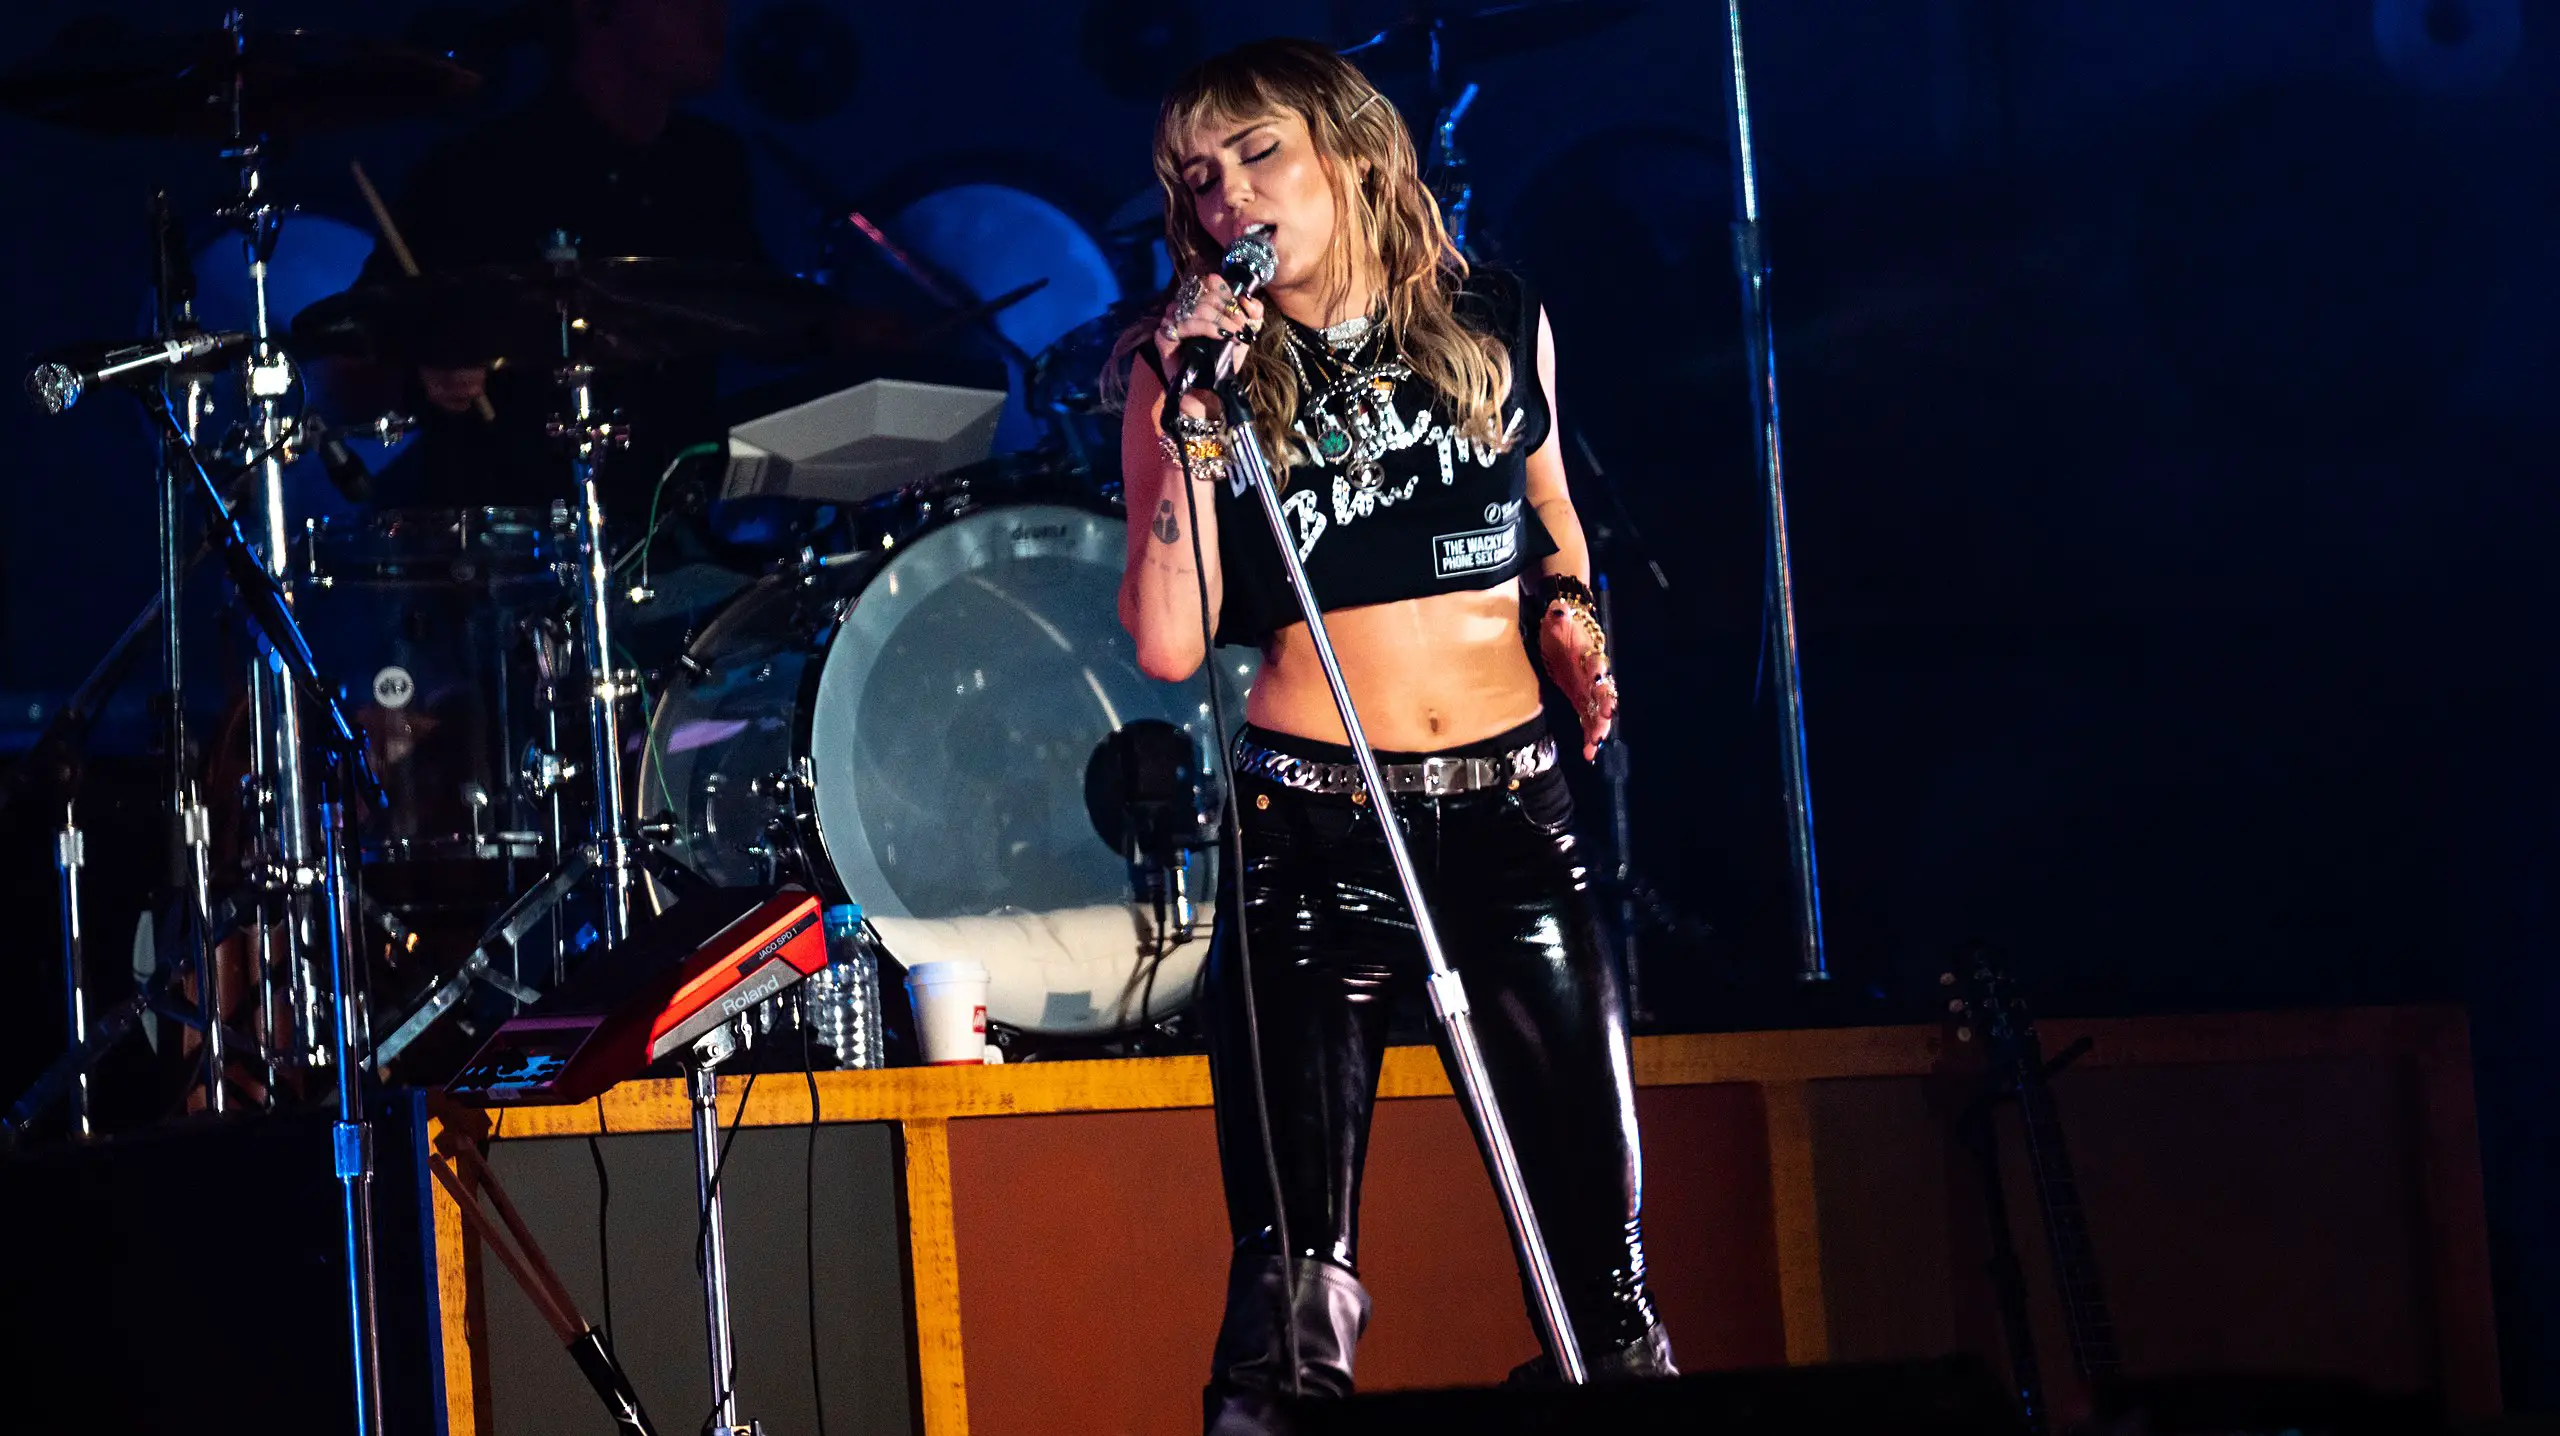 35 Inspirational Miley Cyrus Quotes On Life, Pain & More